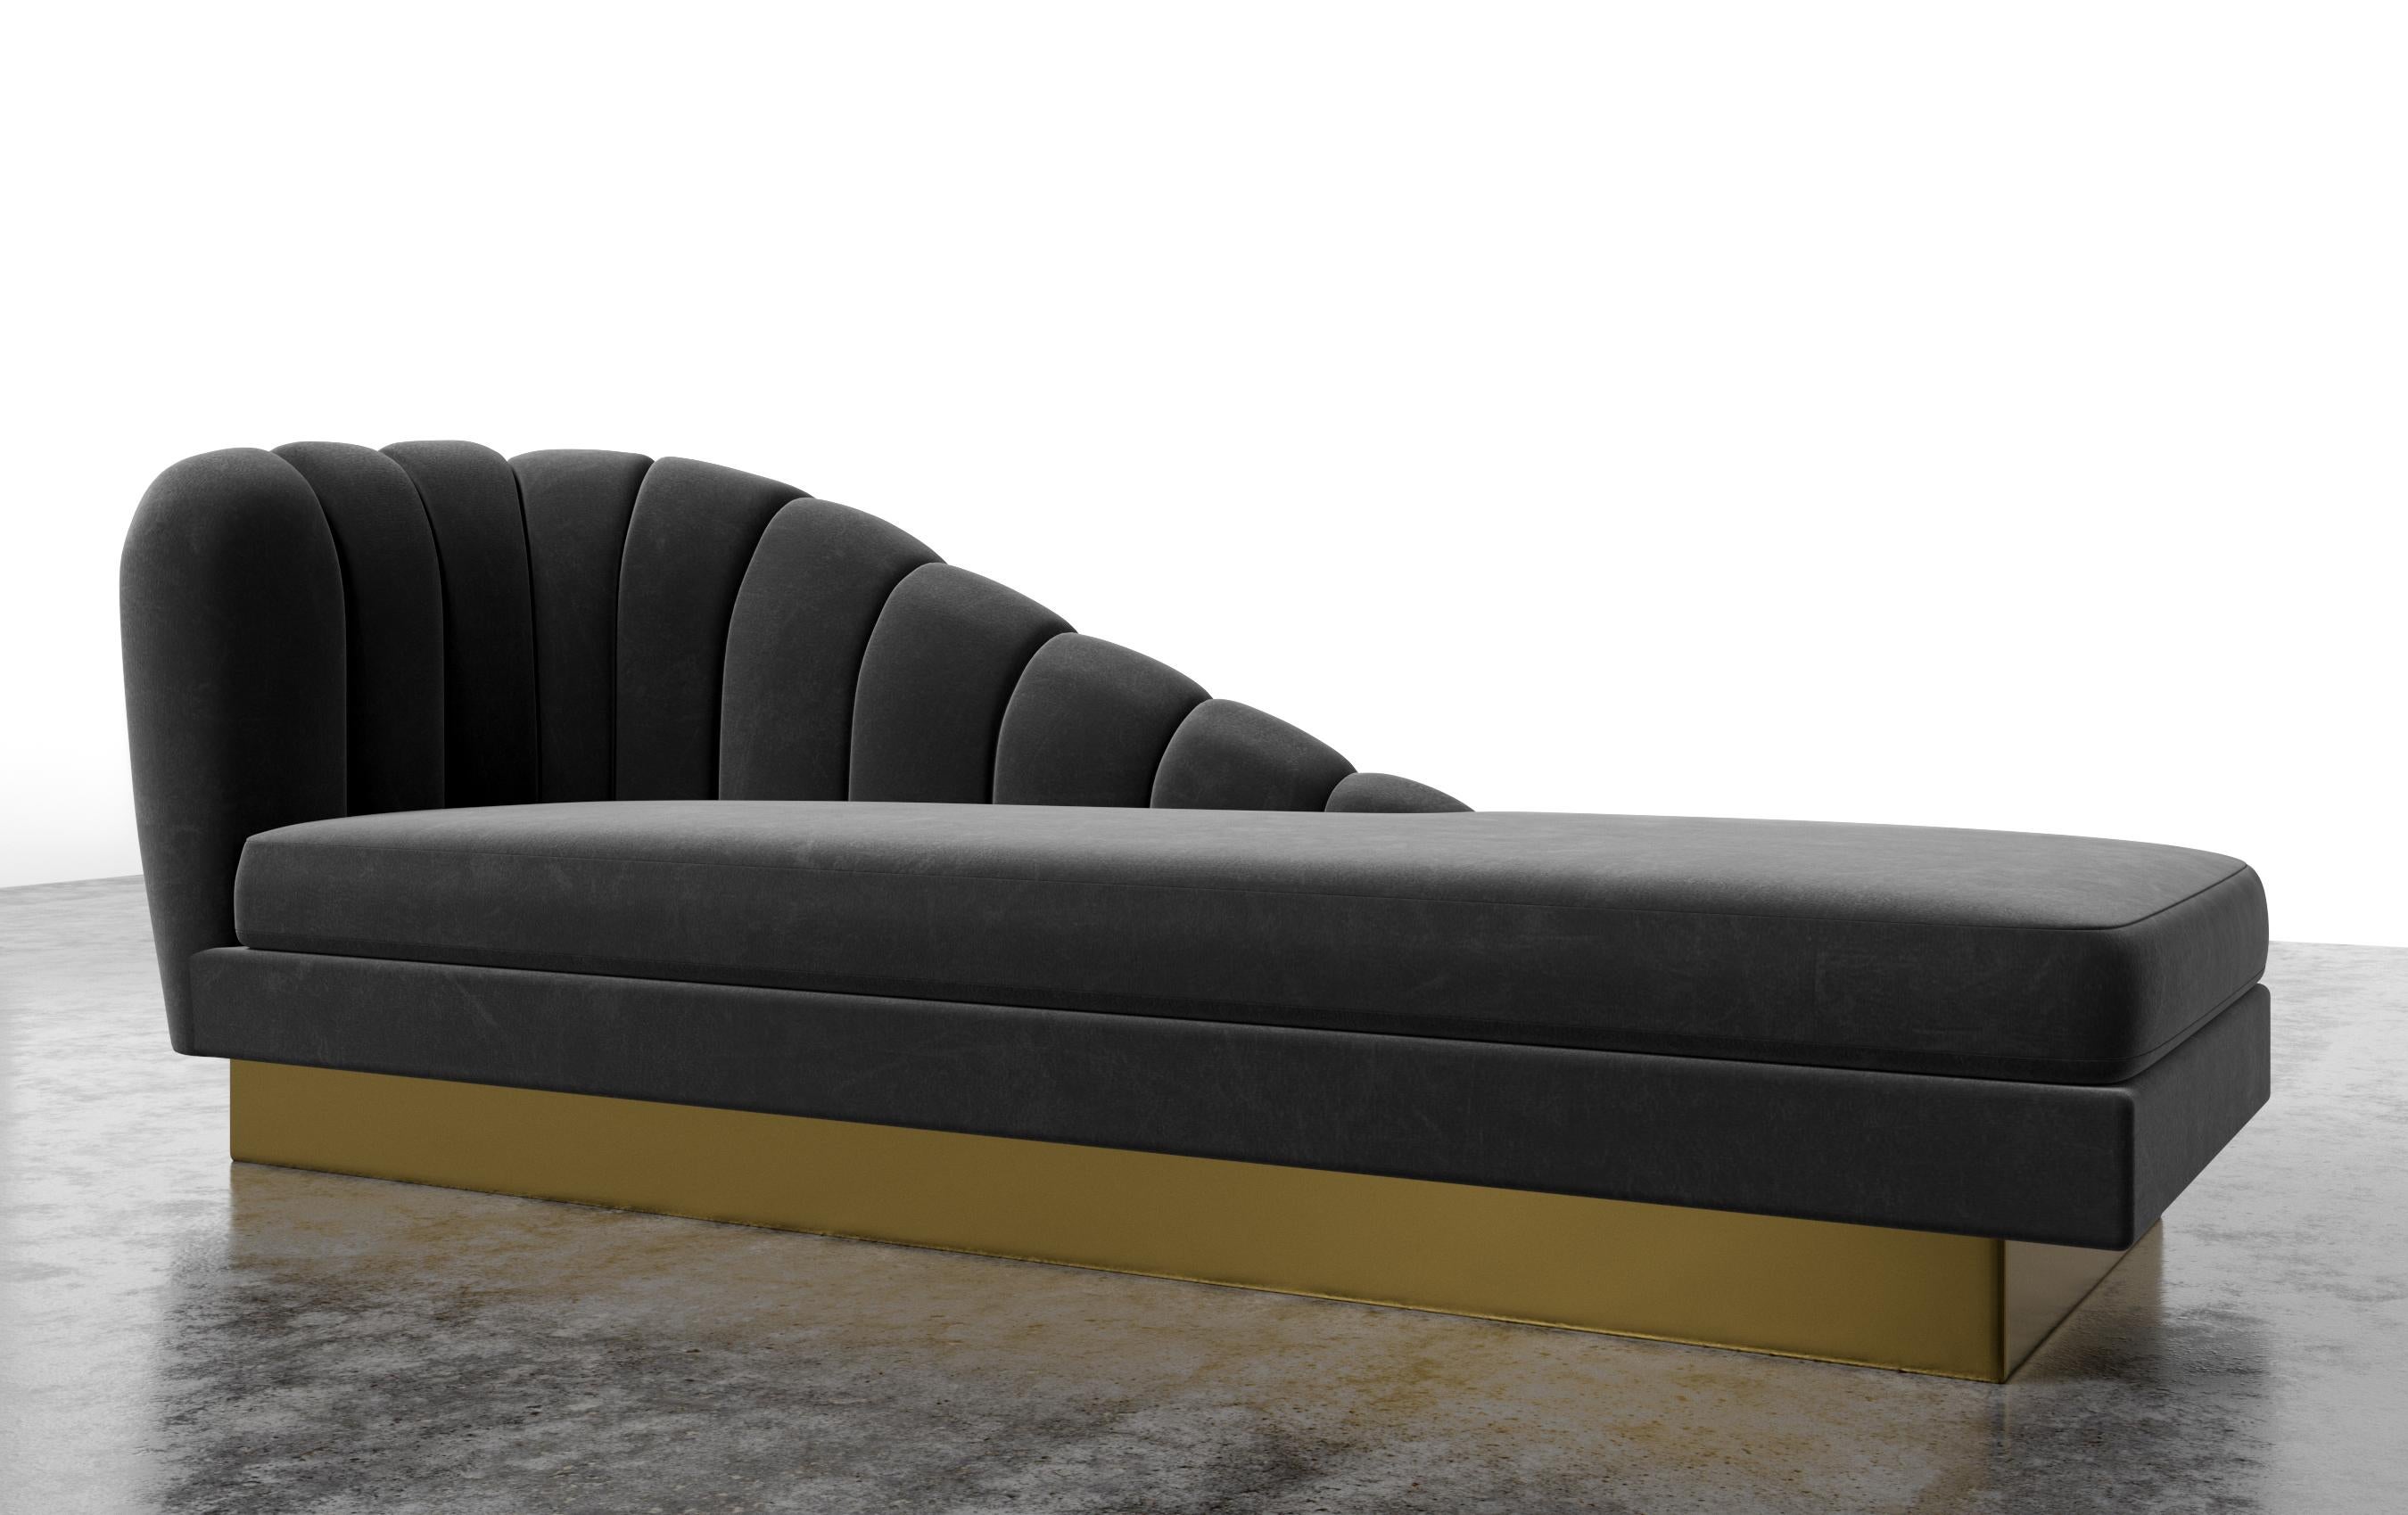 GUINEVERE CHAISE - Modern Asymmetrical Charcoal Velvet Chaise w/ Metal Base

The Guinevere Chaise is a stunning piece of furniture that takes inspiration from the curvature of Gaudi architecture. It features an asymmetrical channeled scalloped slope